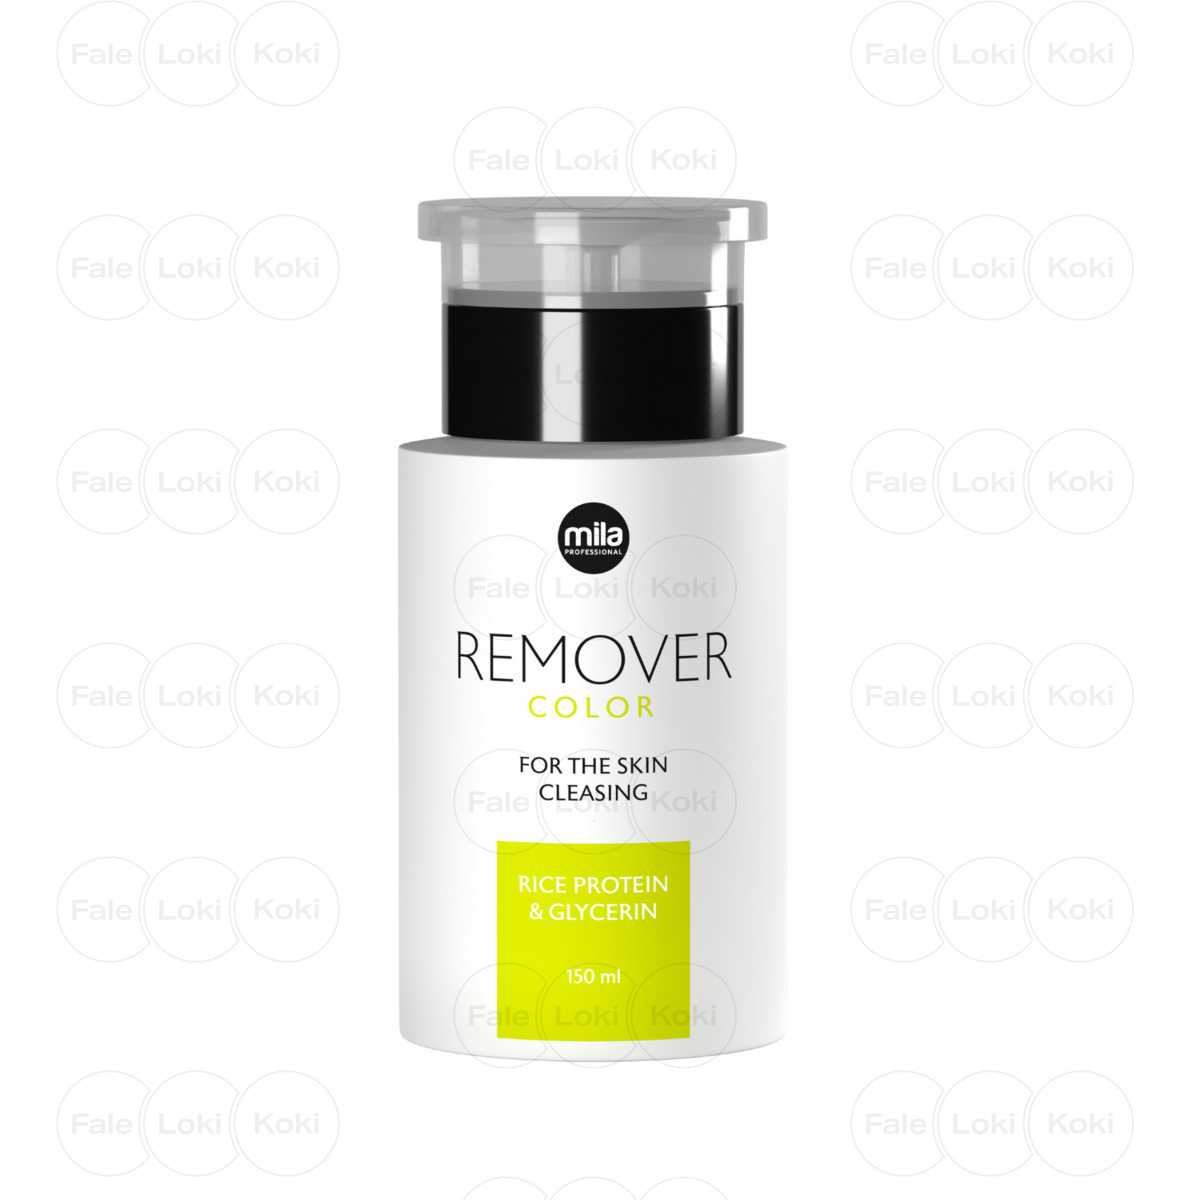 MILA PROFESSIONAL zmywacz do farb Color remover 150 ml